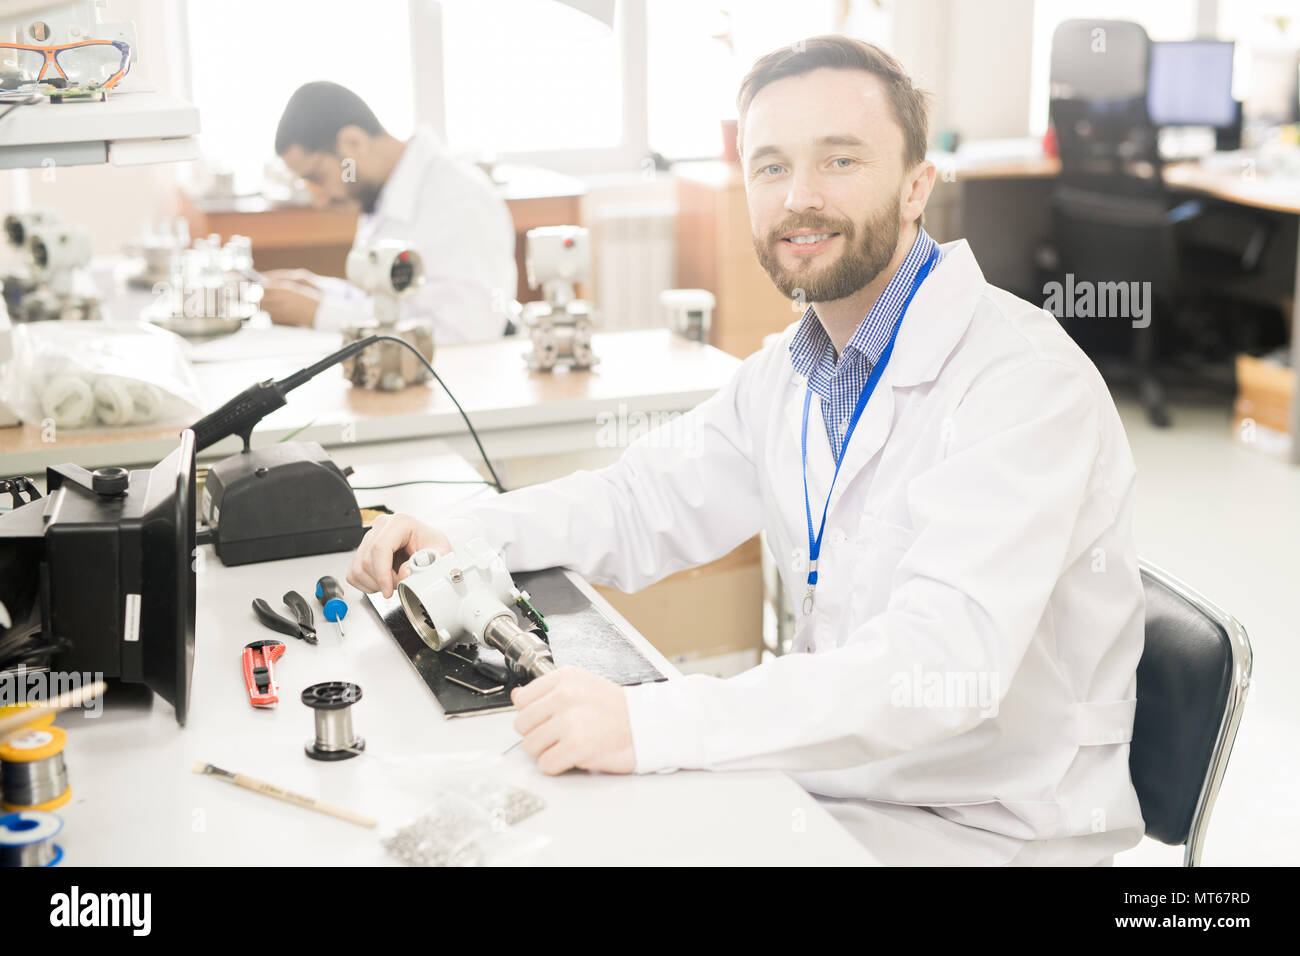 Qualified lab technician analyzing manometer in workshop Stock Photo